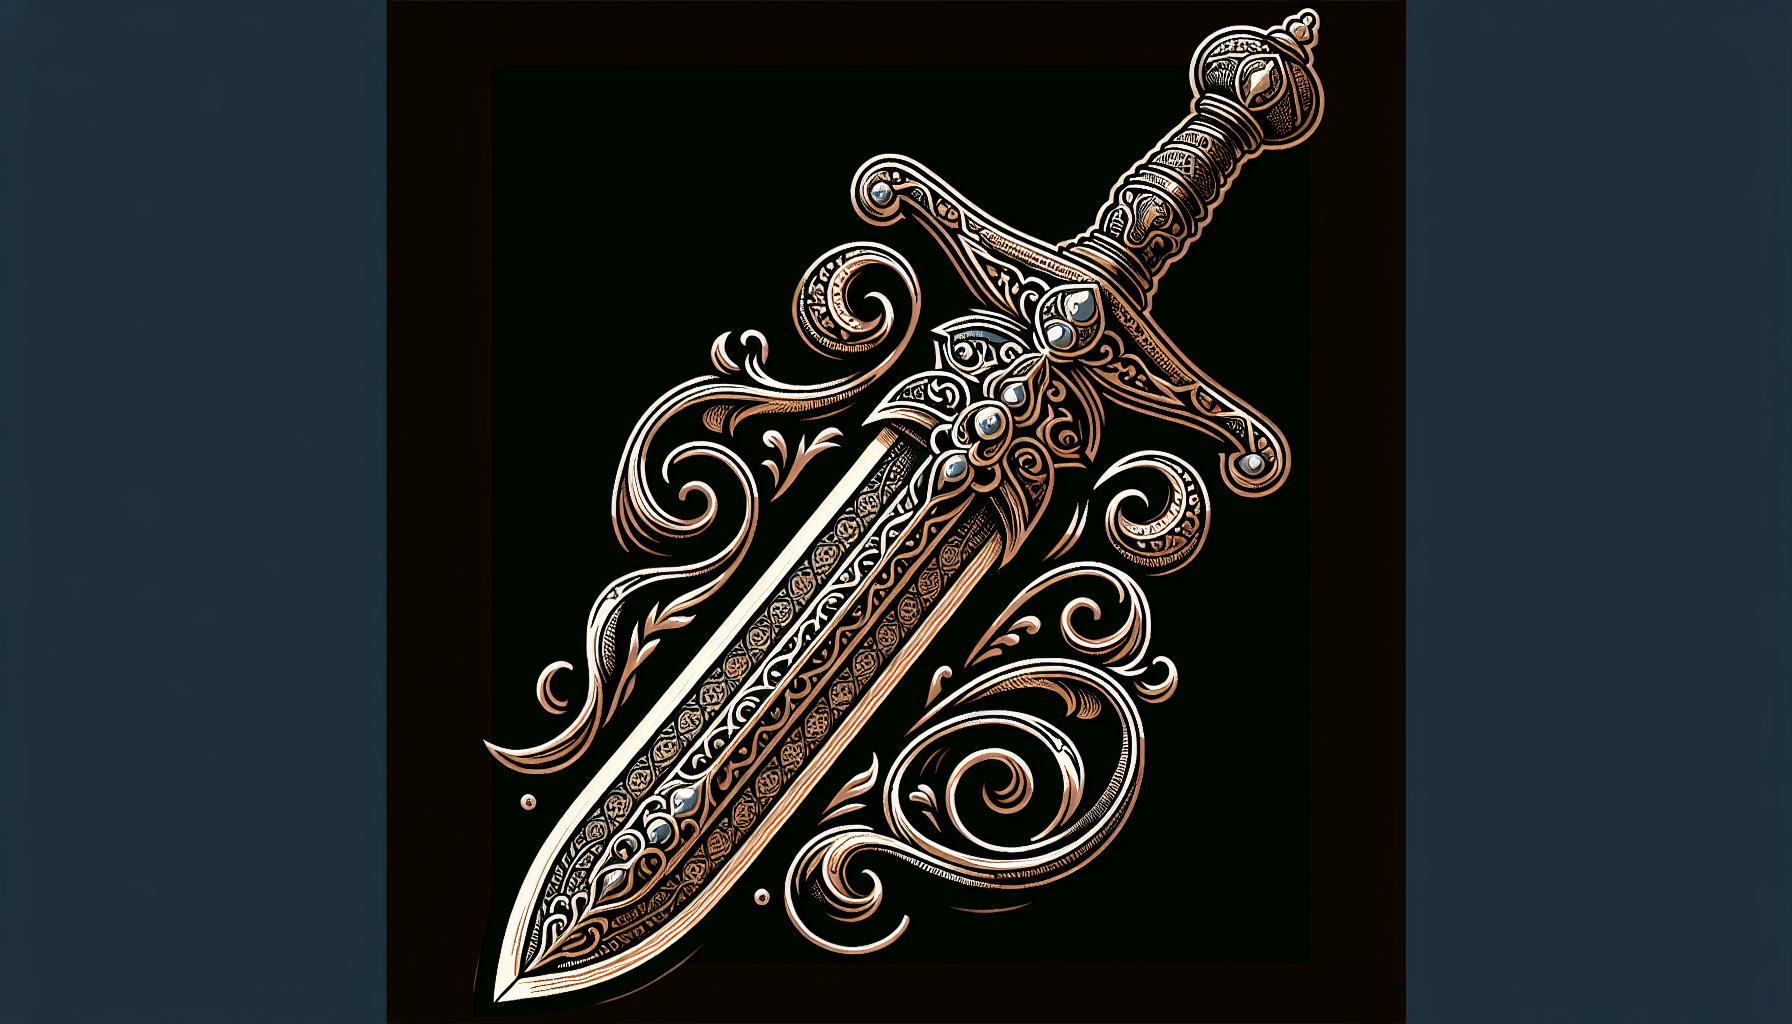 Intricately designed ornate sword with detailed engravings on the blade and hilt, surrounded by decorative flourishes inspired by Turkish motifs on a dark background.